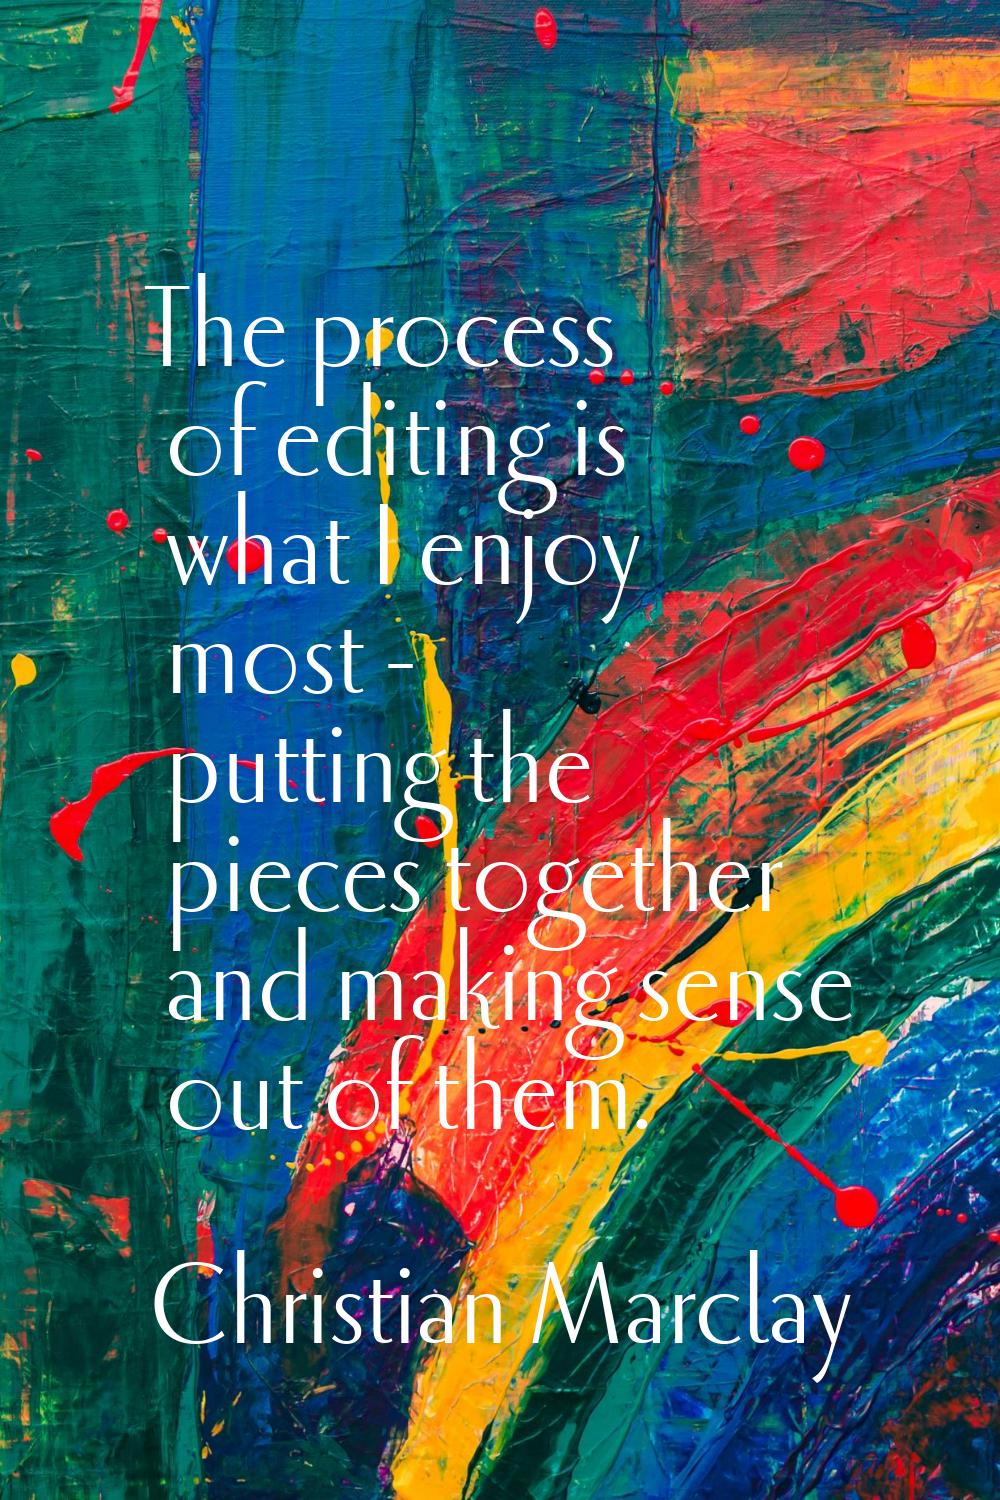 The process of editing is what I enjoy most - putting the pieces together and making sense out of t